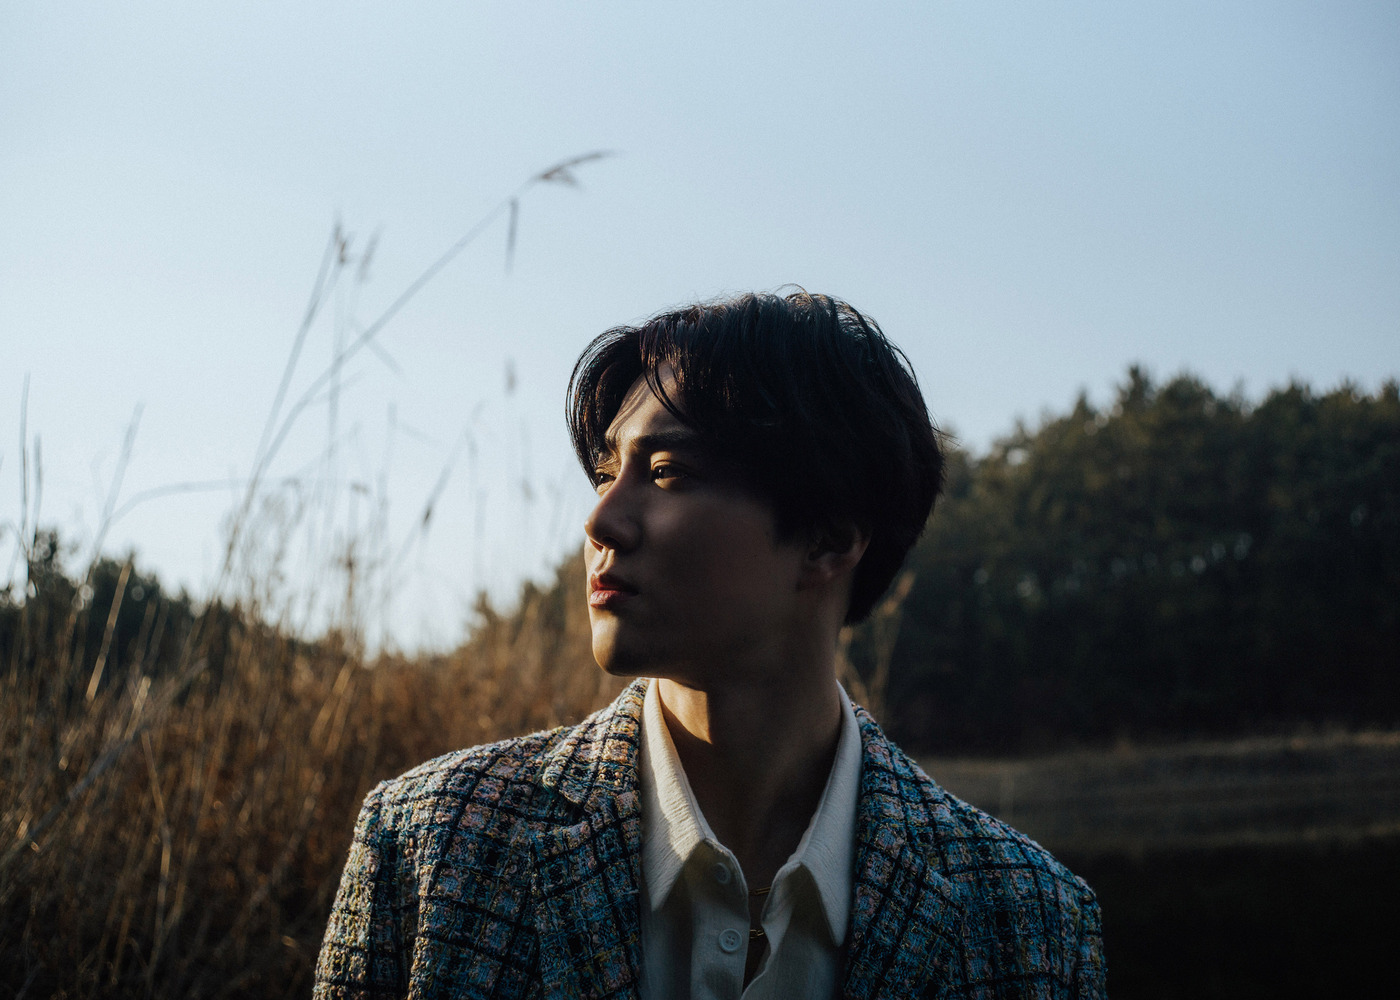 Suhos first mini album Self-Portrait contains six songs including the title song Love, Hazard (Lets Love) of the emotional modern rock genre, and it seems that you can meet the song Your Turn (For You Now) in which Younha participated in Feature.Especially, the song Your Turn (For You Now) is an acoustic pop genre with an impressive warm piano melody and guitar sound, which doubles the charm of the song by harmonizing Suhos distinctive clear and soft tone with Younhas fond vocals.In addition, Suhos lyrics are a heartfelt heart that I hope to have a happy dream without worrying about me because I will comfort you now to the grateful opponent who has been a hard moment for the lyrics that Suho participated in the lyrics.In addition, the second mood sampler video was released on Suhos official website and various SNS EXO accounts on the 20th, and this album name was self-portrait, so it raised expectations with Suho recalling his past times.On the other hand, Suhos first mini album Self-portrait will be released on various music sites at 6 pm on the 30th, and will be released on the same day.